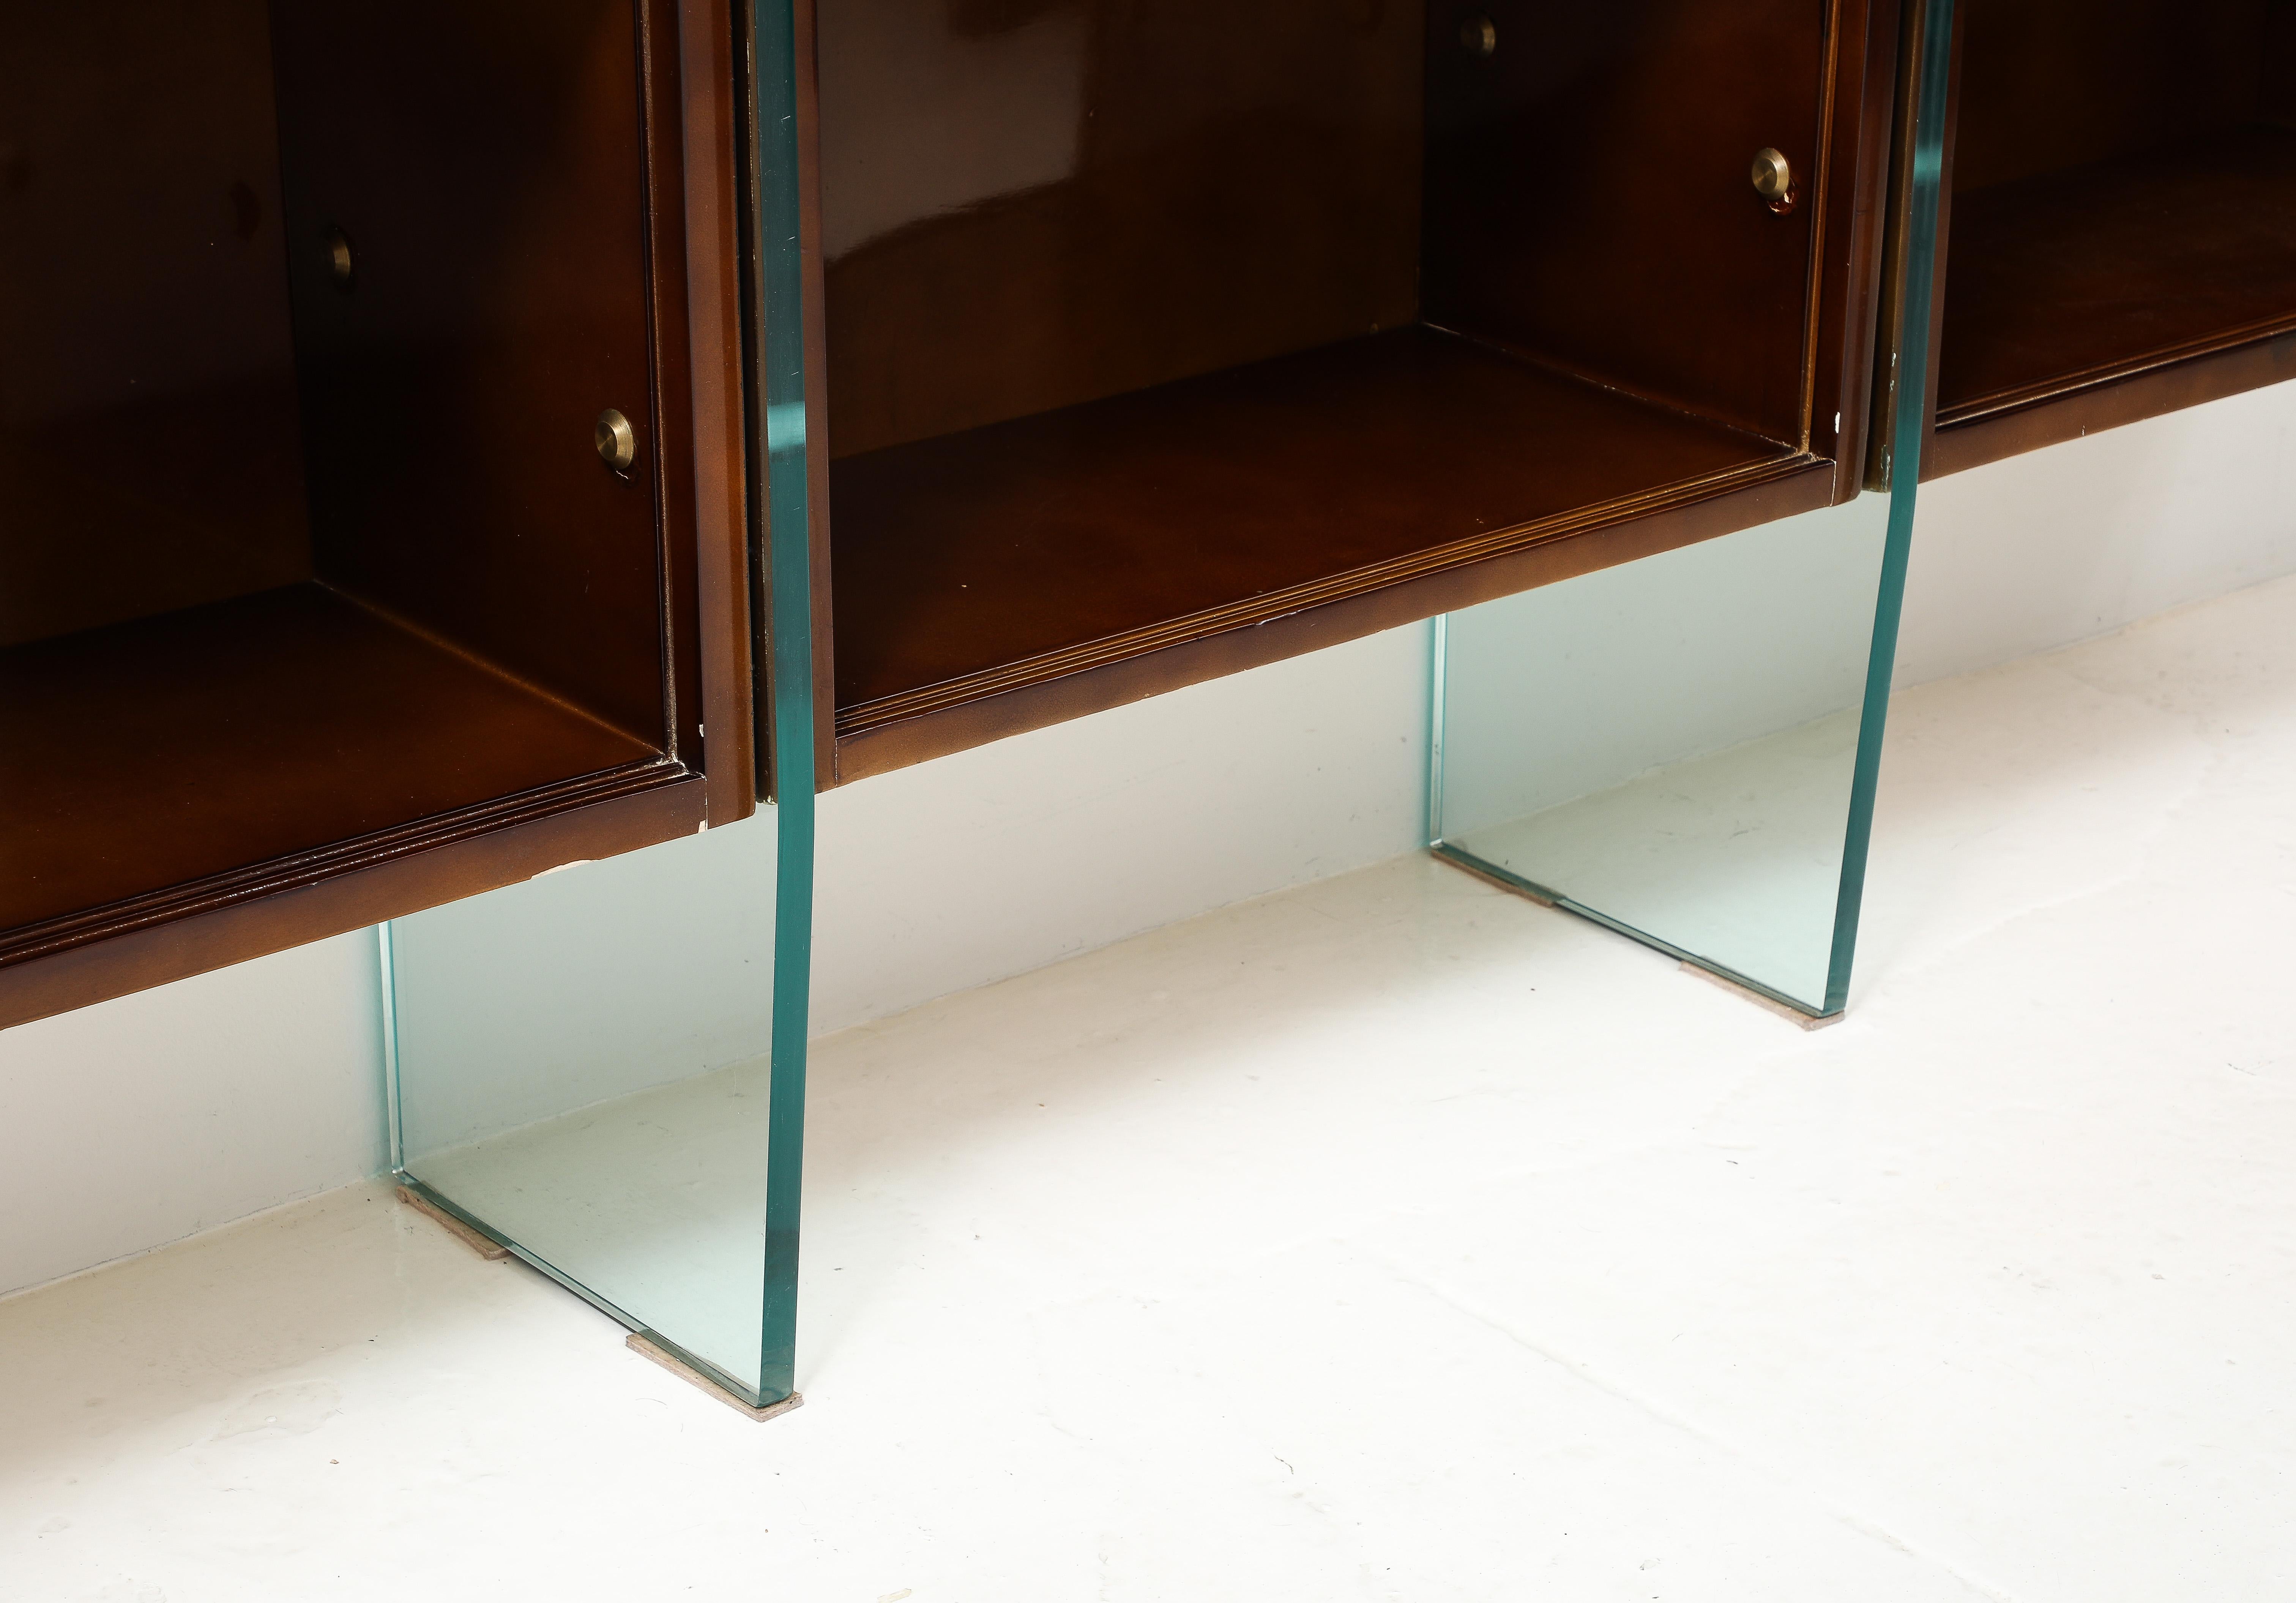 Exceptional triple floating bookcase in beka lacquer with bronze accents on saint gobain glass legs.
